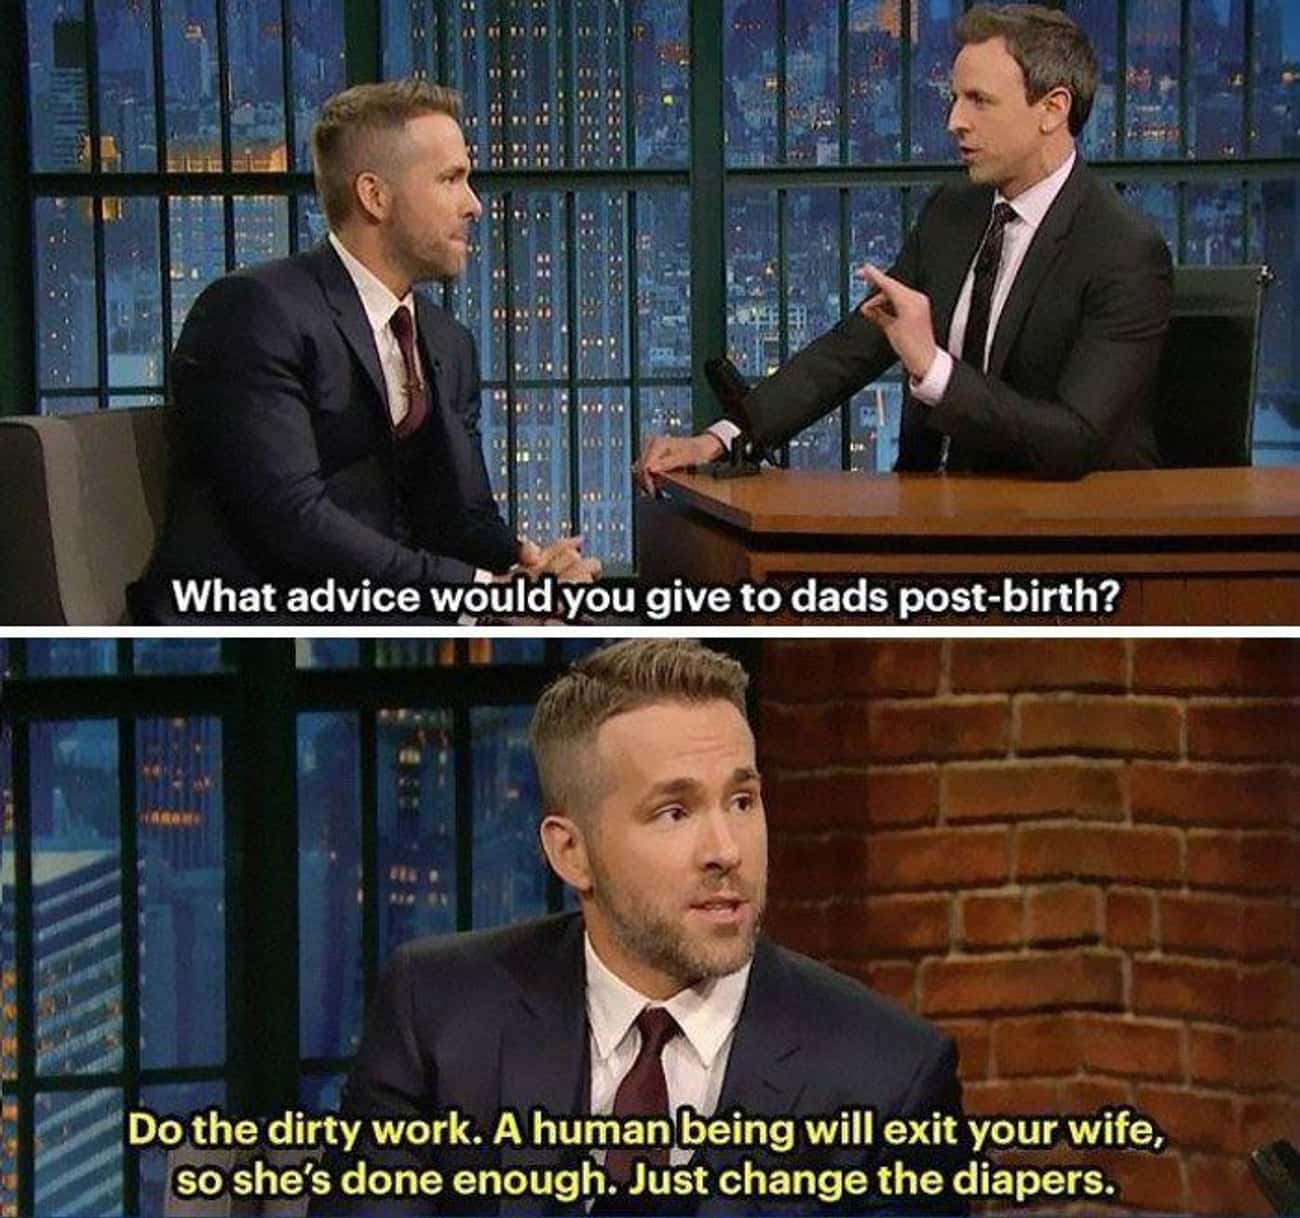 He gives valuable advice to new dads